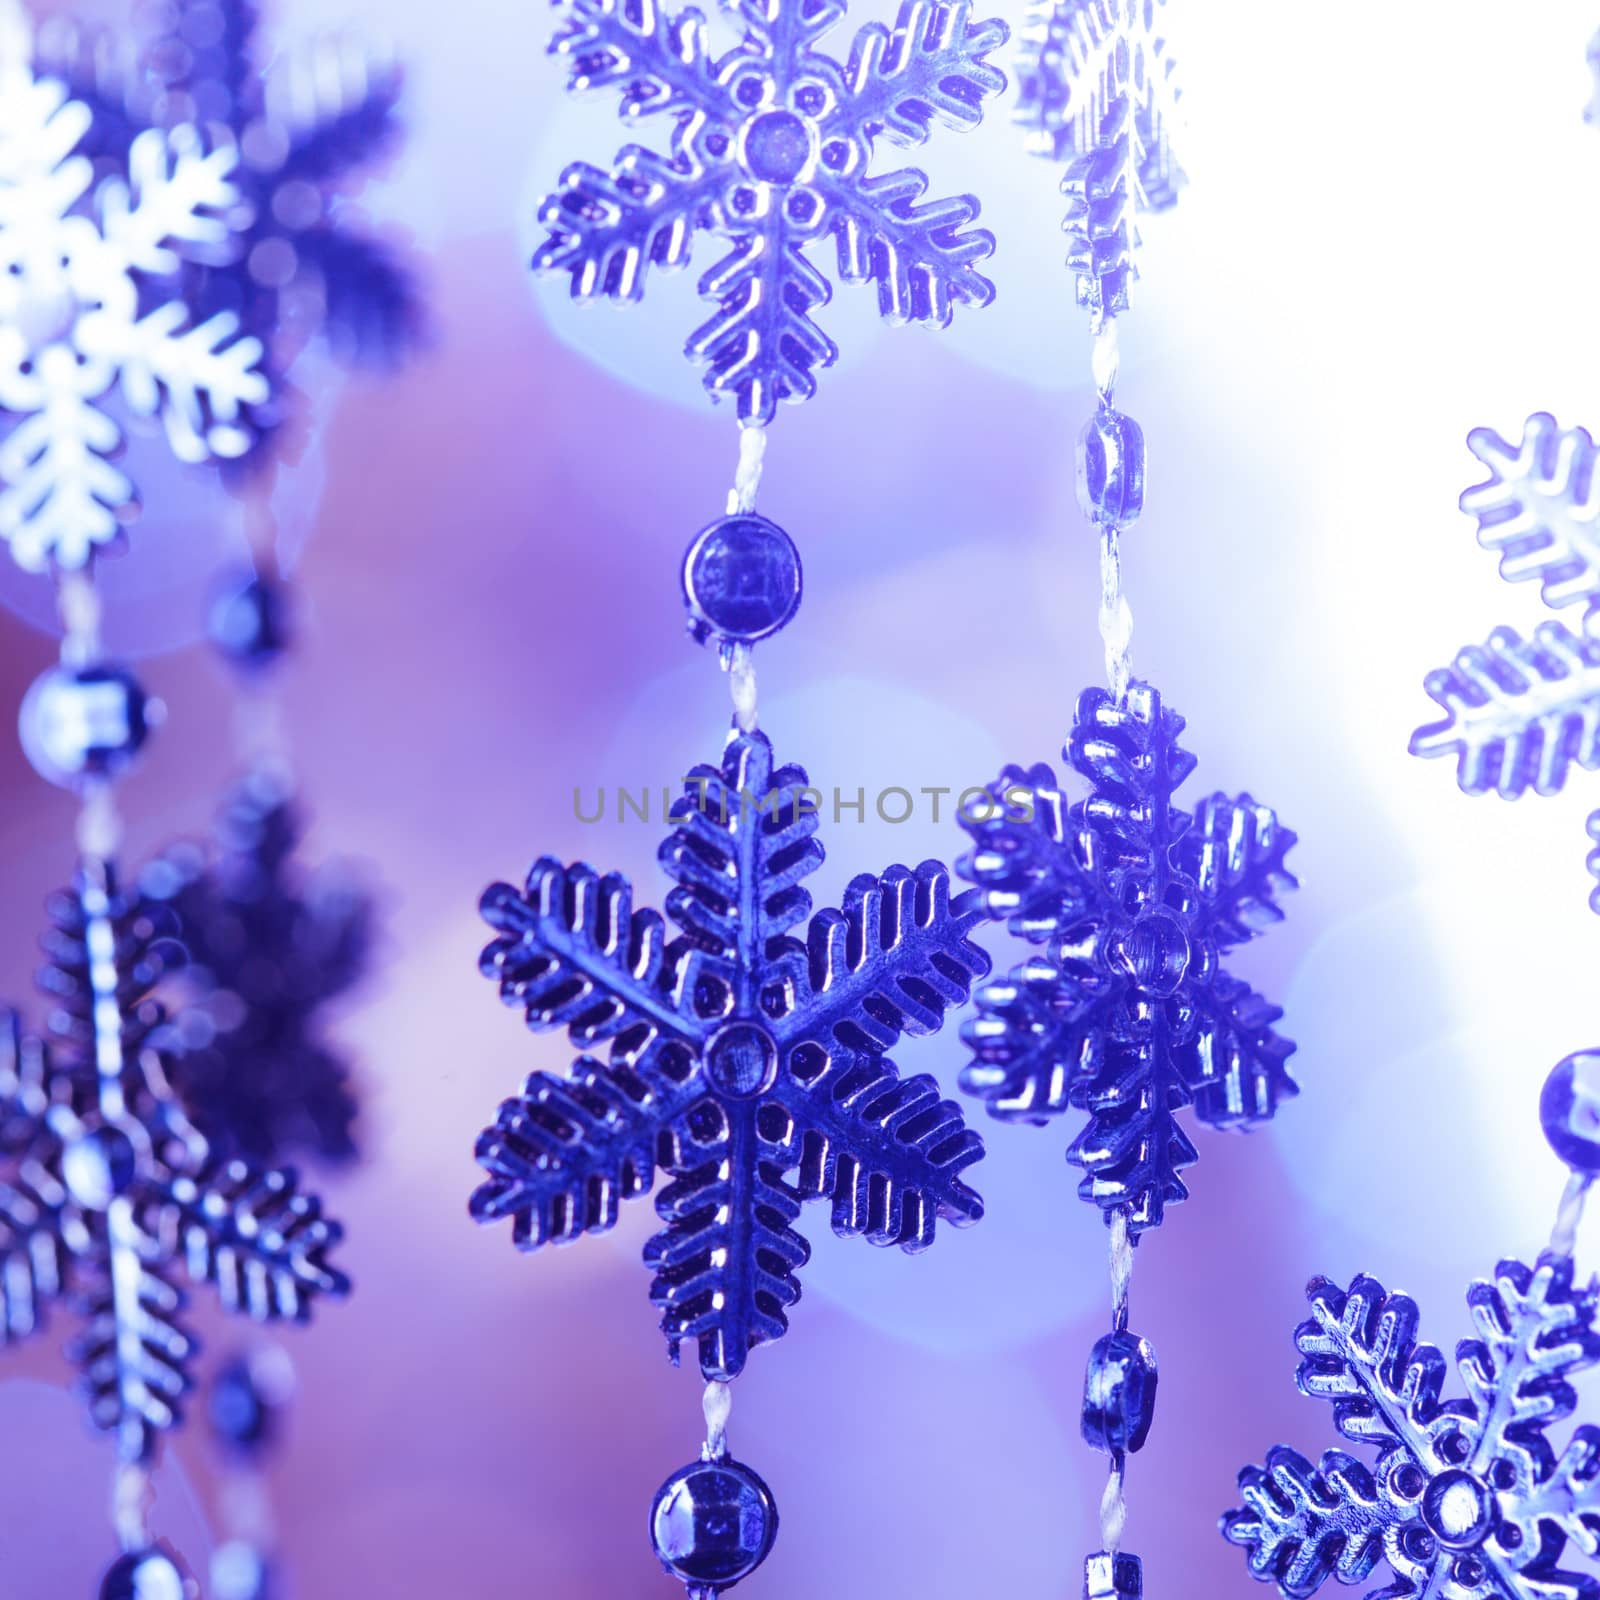 Blue snowflakes on the 
lashing over bokeh background